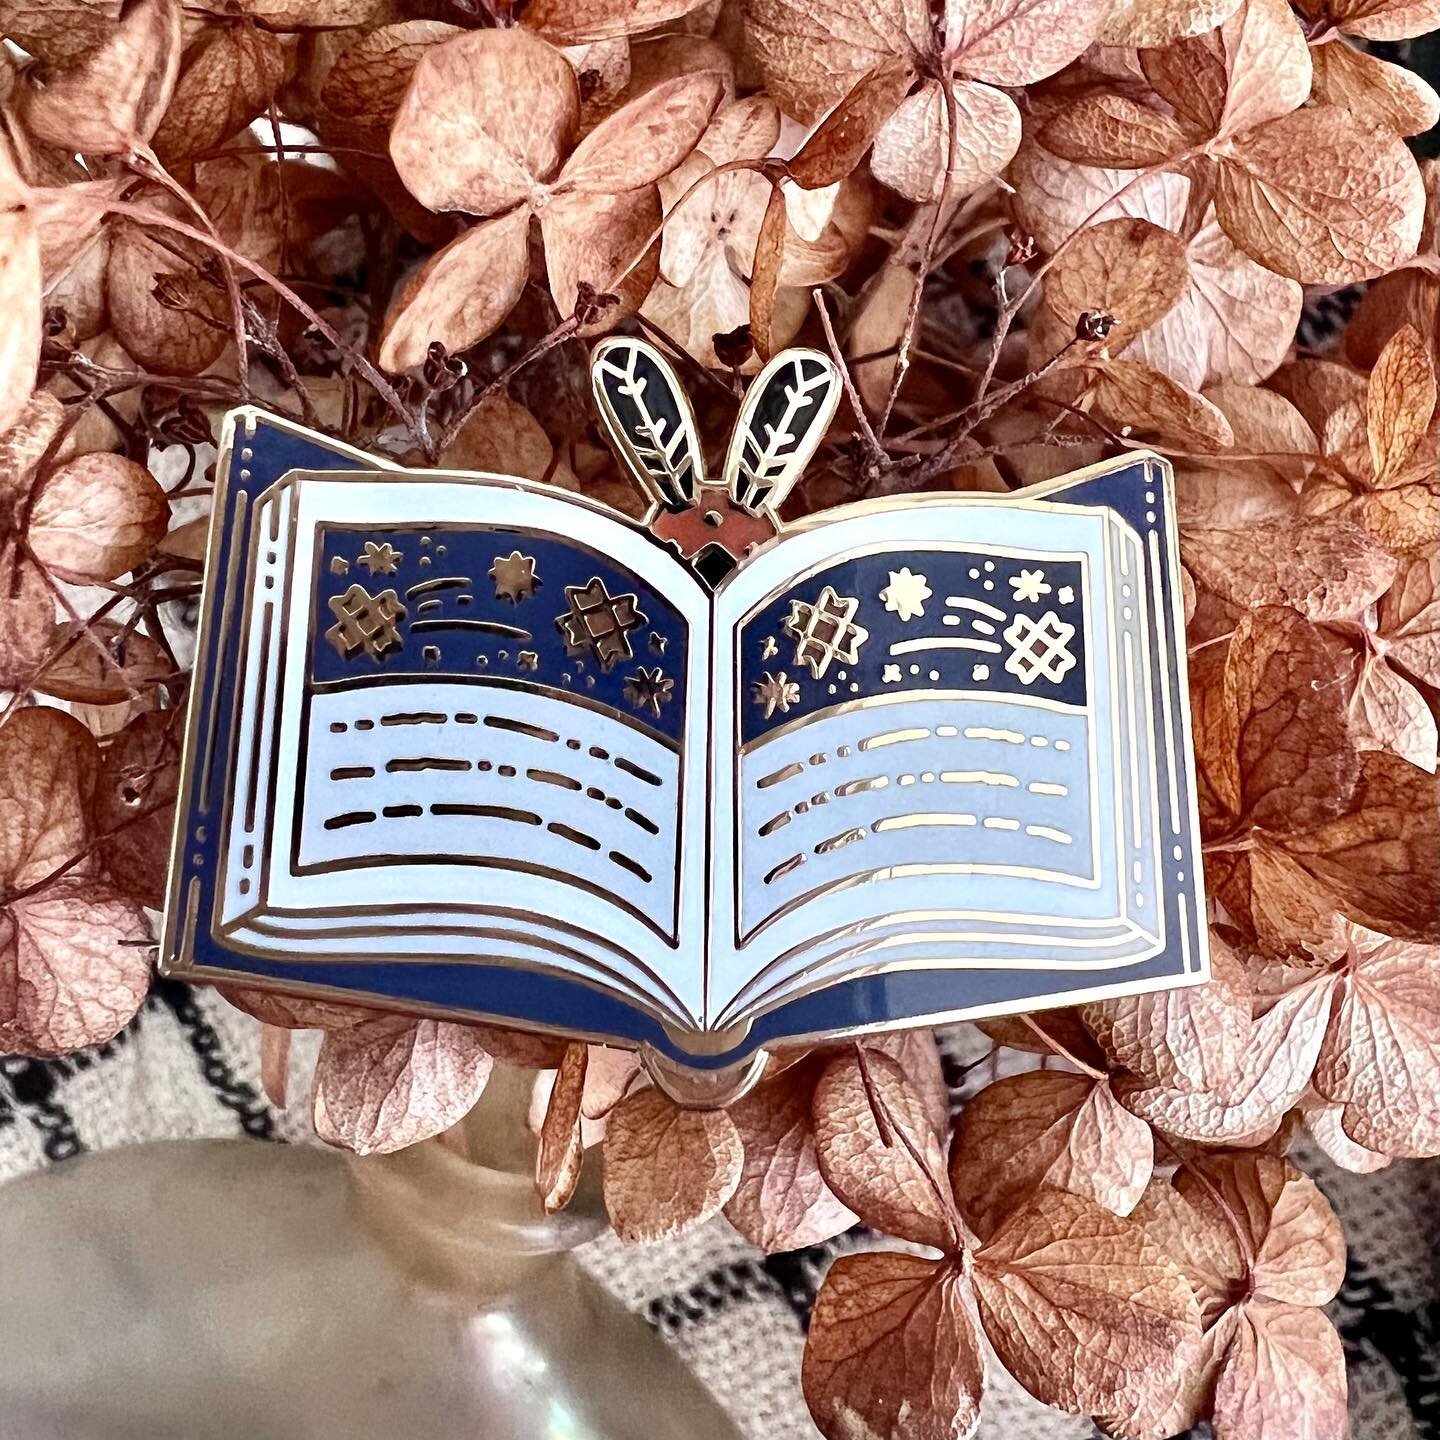 Show your love for reading with this incredible pin! What I love about reading is that it gives me the opportunity to dive in and explore a whole new world. 
⠀⠀⠀⠀⠀⠀⠀⠀⠀
Some of my favorite reads from this year have been:
WinterSmith by Terry Pratchett